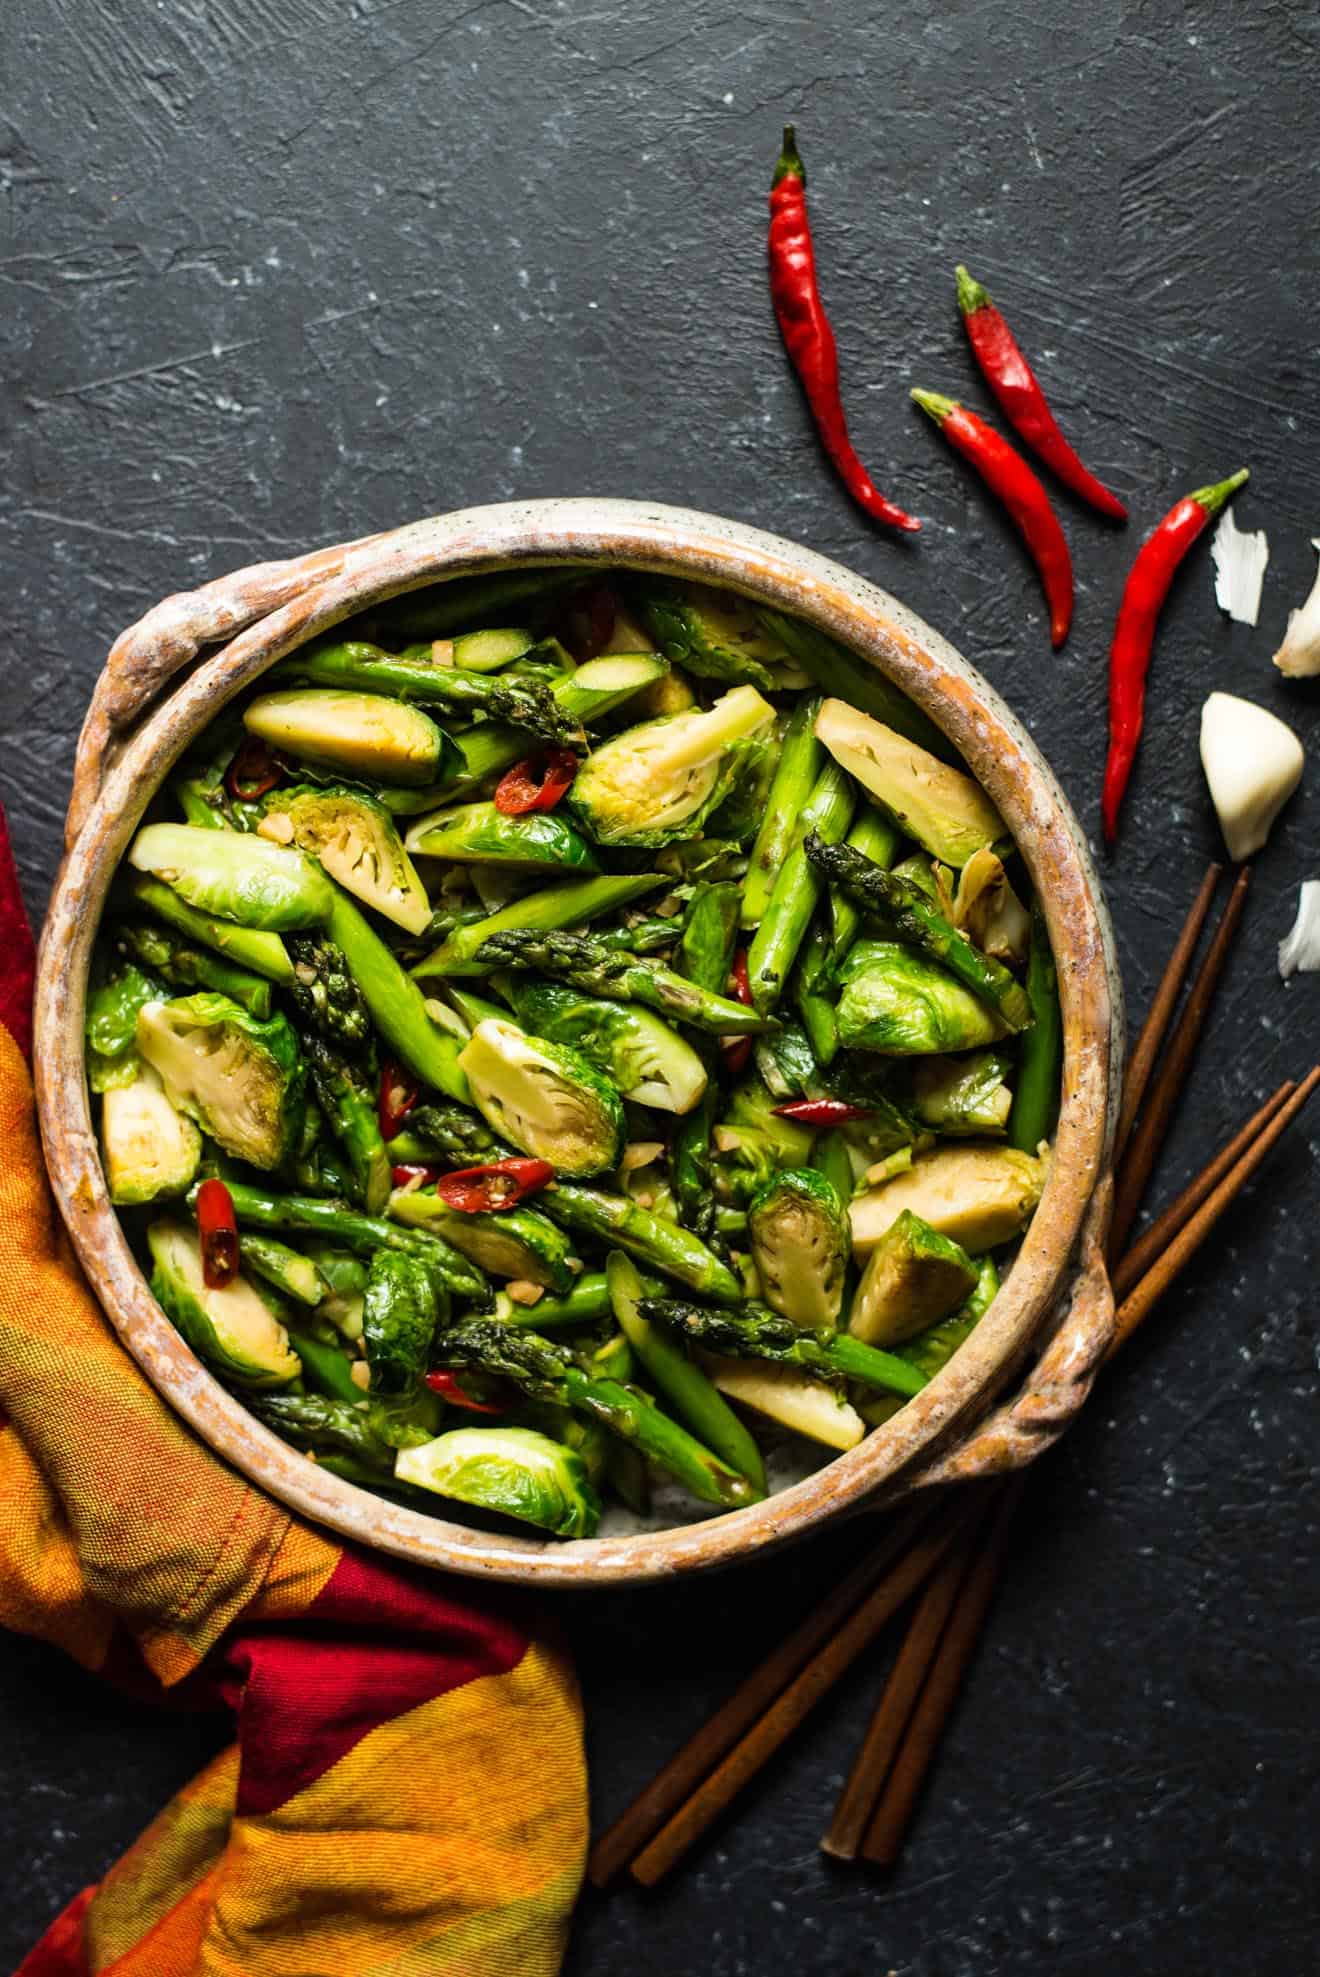 Chili & Garlic Stir Fried Brussels Sprouts with Asparagus - a quick and easy side dish that's ready in 20 minutes!